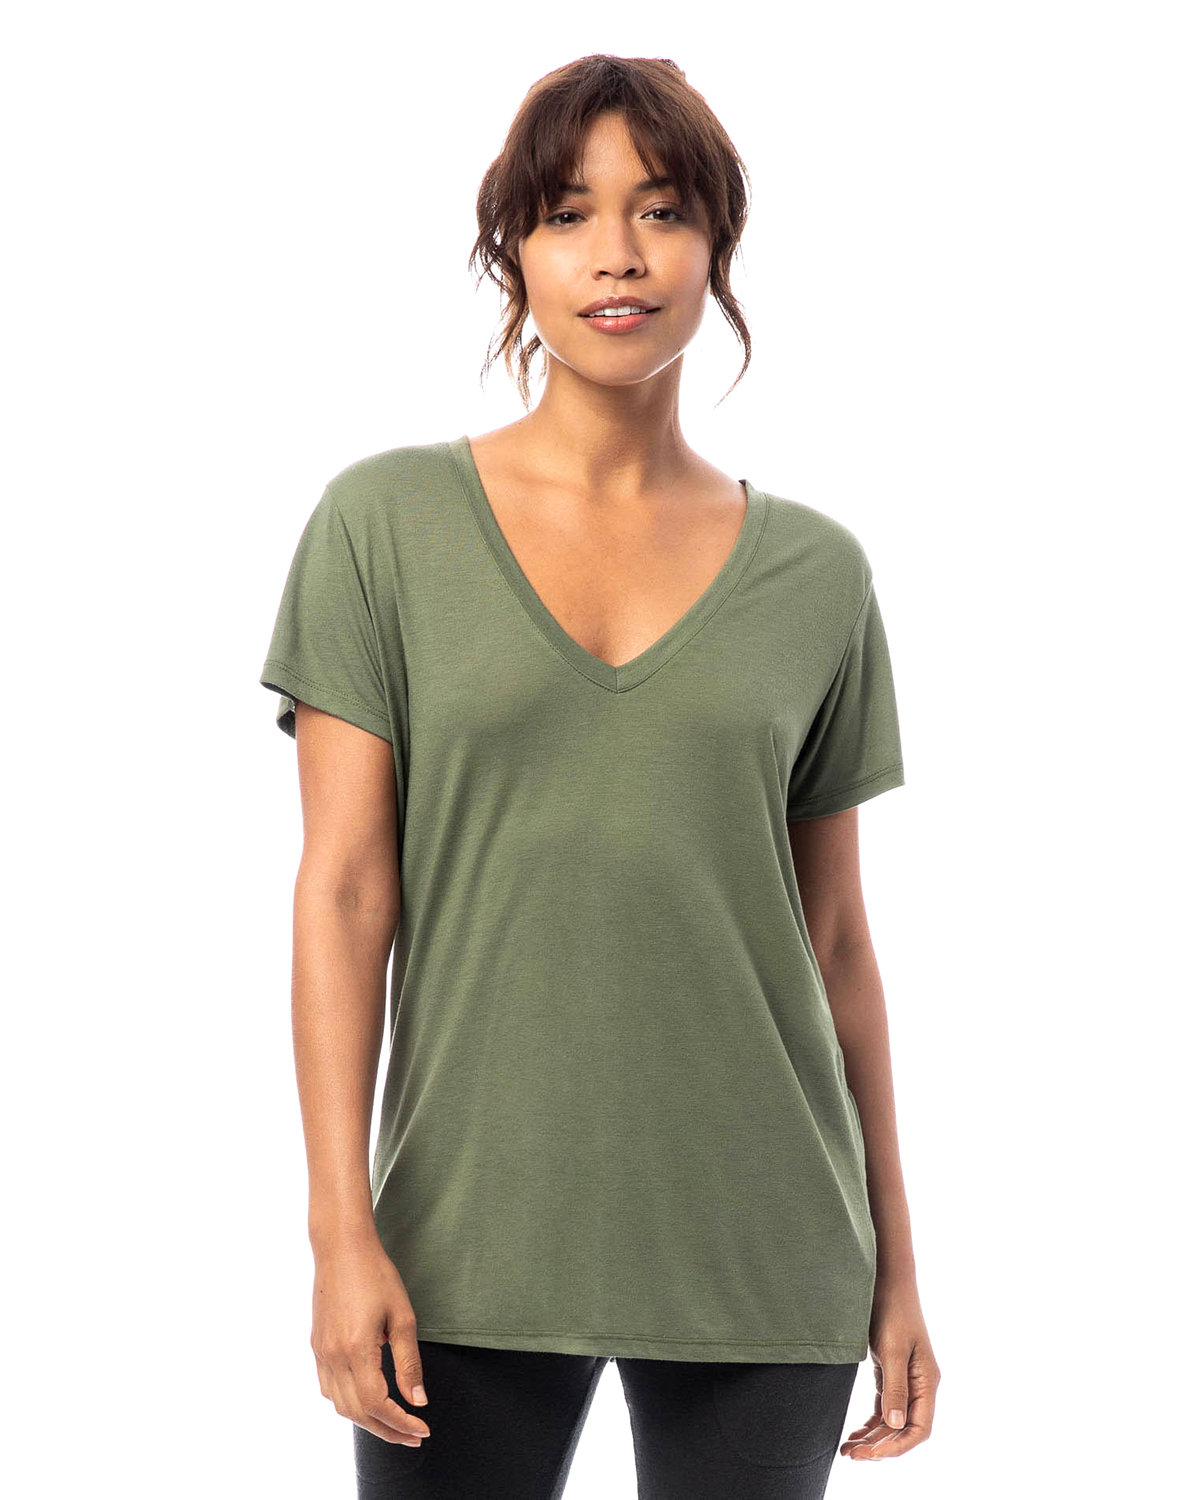 click to view ARMY GREEN